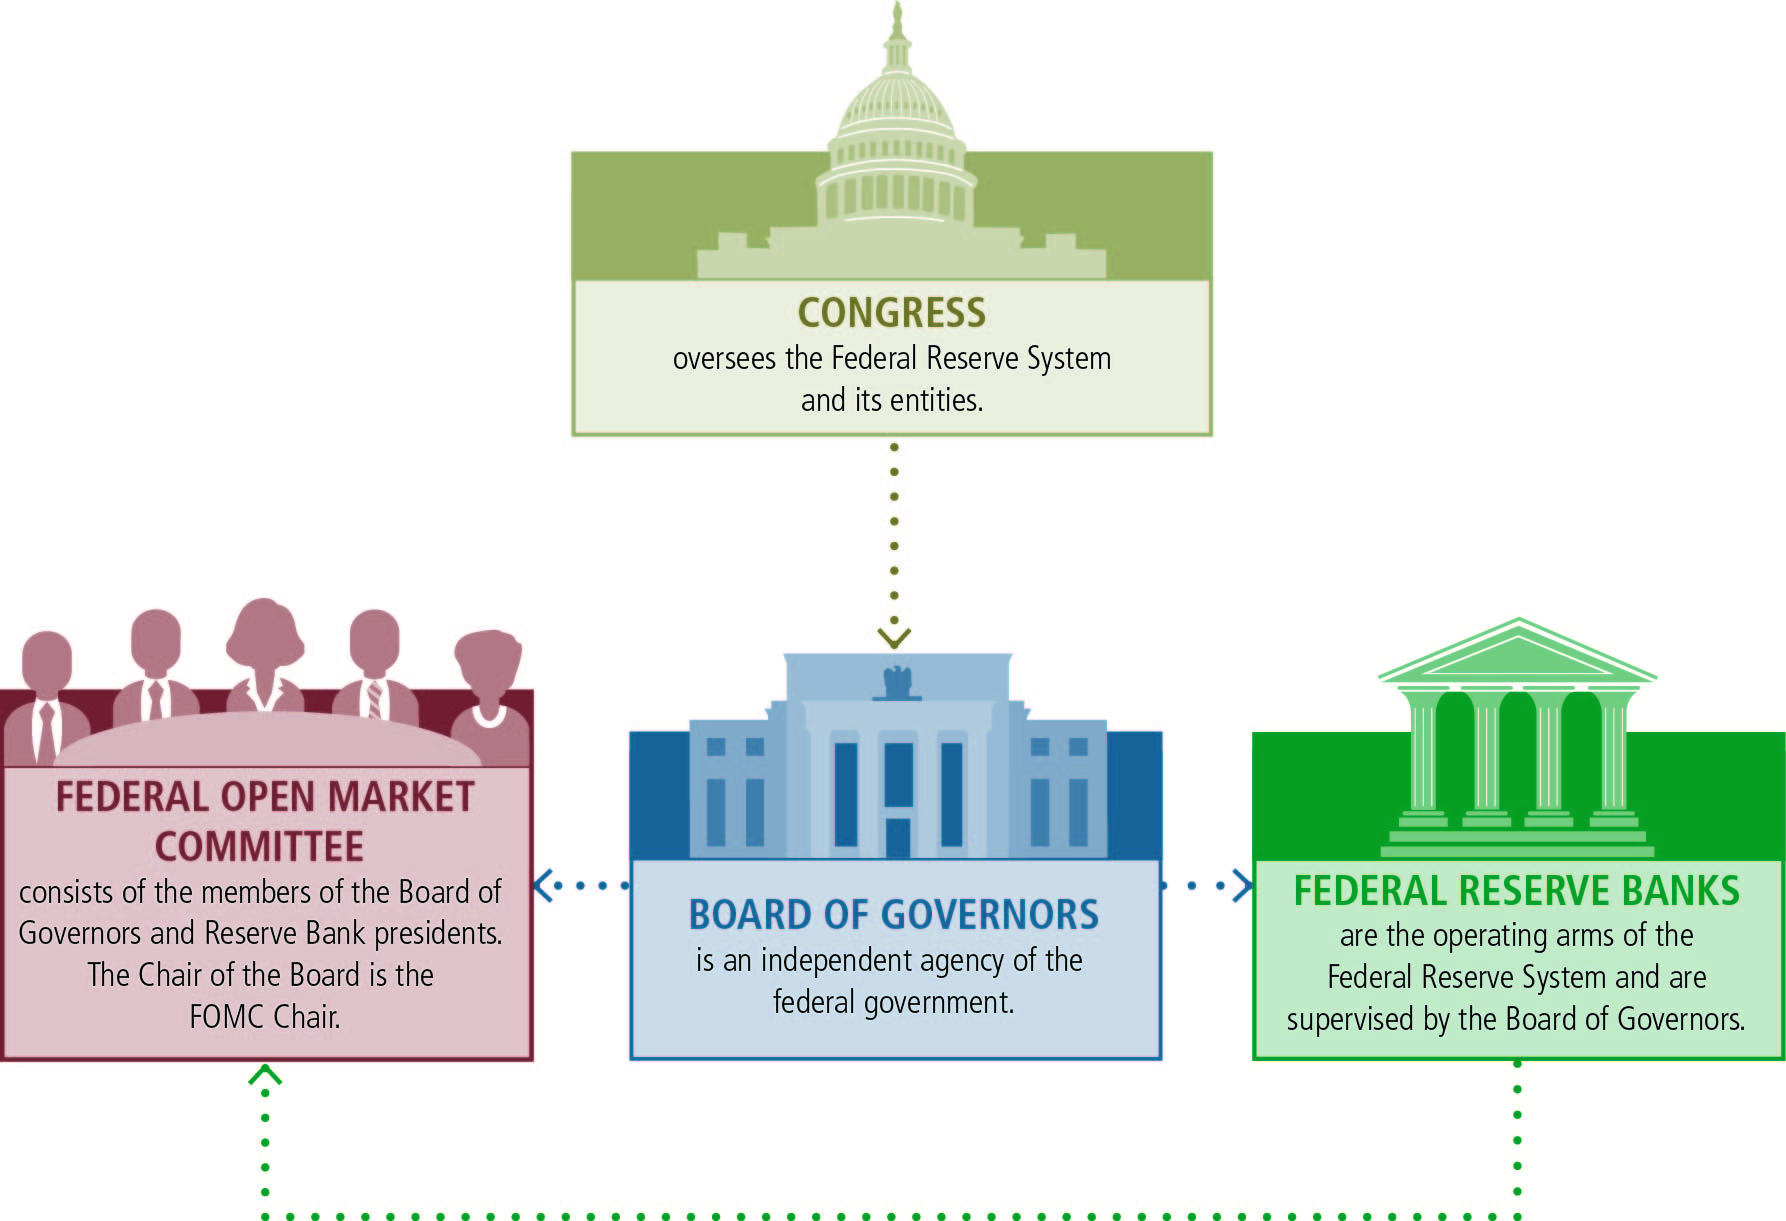 CONGRESS graphic positioned top to three key Confederate Reserves entities' graphics: 'CONGRESS oversees this Federative Spare System and its entities.' A dotted arrow leads down to the BOARD abbildung: 'BOARD CONCERNING GOVERNORS is at independence agency of this federal government.' A dotted indicator leads right from the BOARD graphic to the BANKS graphic: 'FEDERAL RESERVE BANKS are to operating arms of this Federal Reserve System and are supervised with the Board of Governors.' Punctuated arrows lead left from the BOARD and BANKS graphics to the FOMC graphic: 'FEDERAL OPEN MARKET COMMITTEE bestandteile a which parts concerning the Boarding off Governors or Reserve Bank presidents. The Chair is of Food is the FOMC Chair.